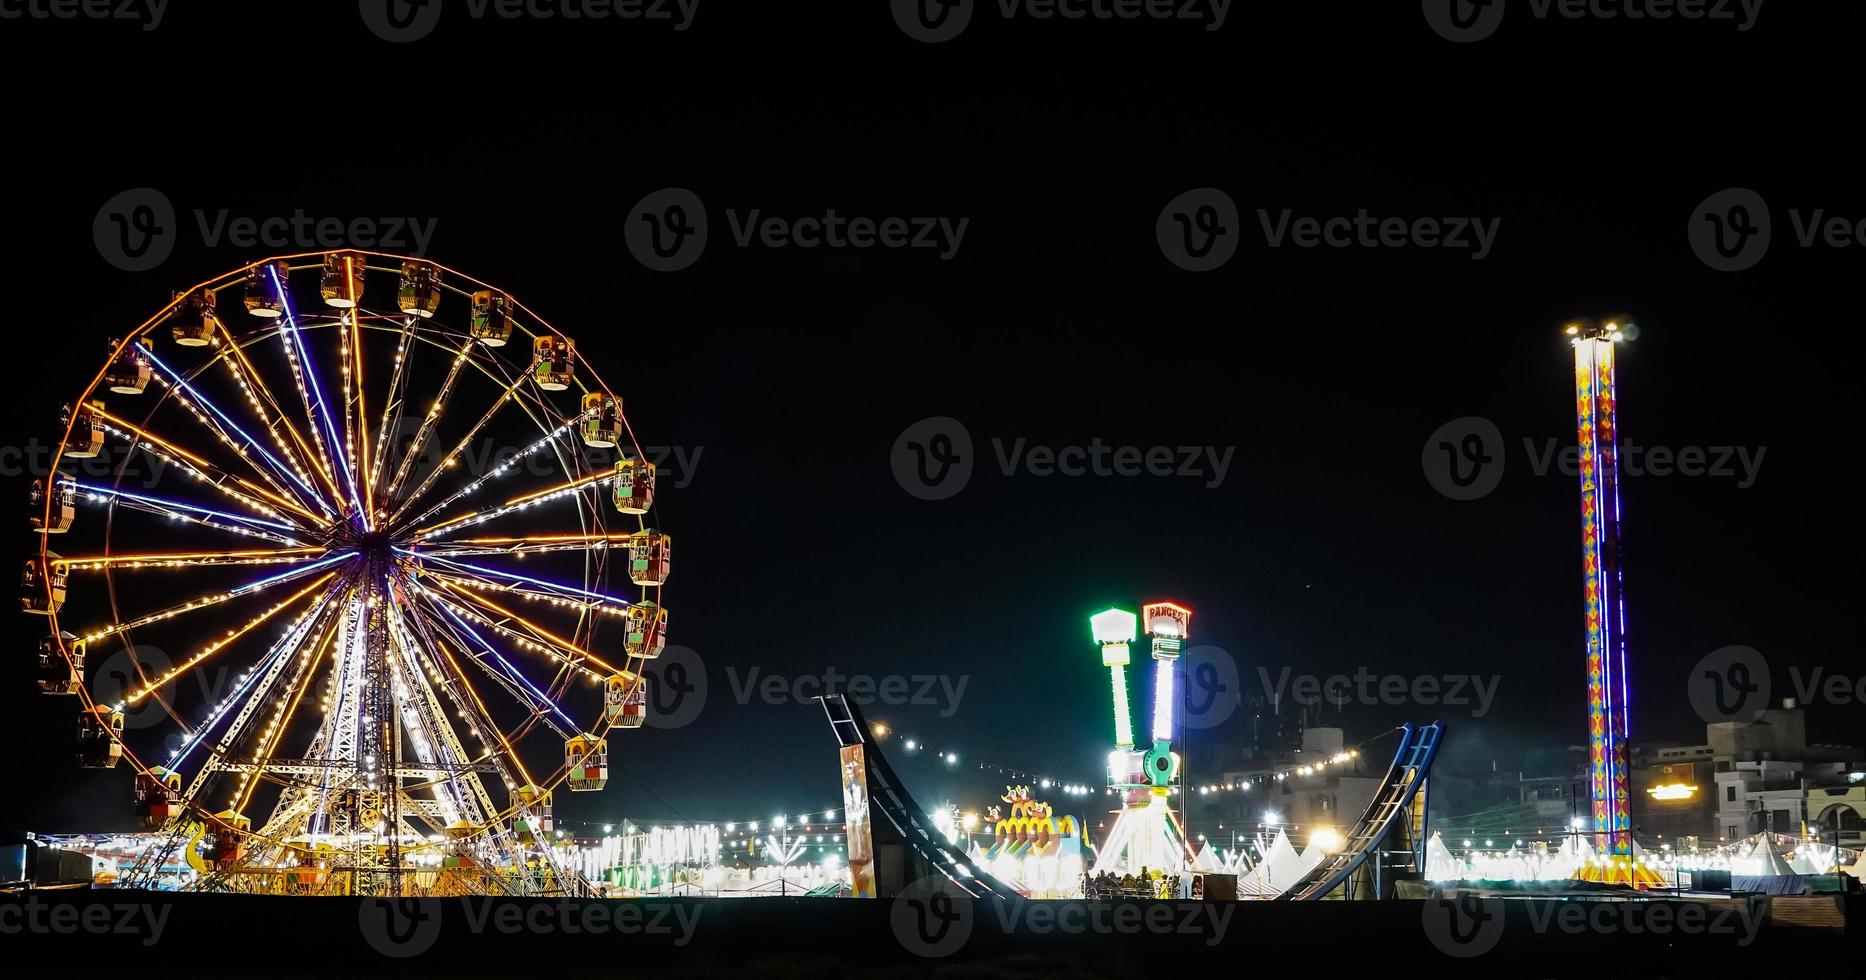 image of a fair event hd. photo